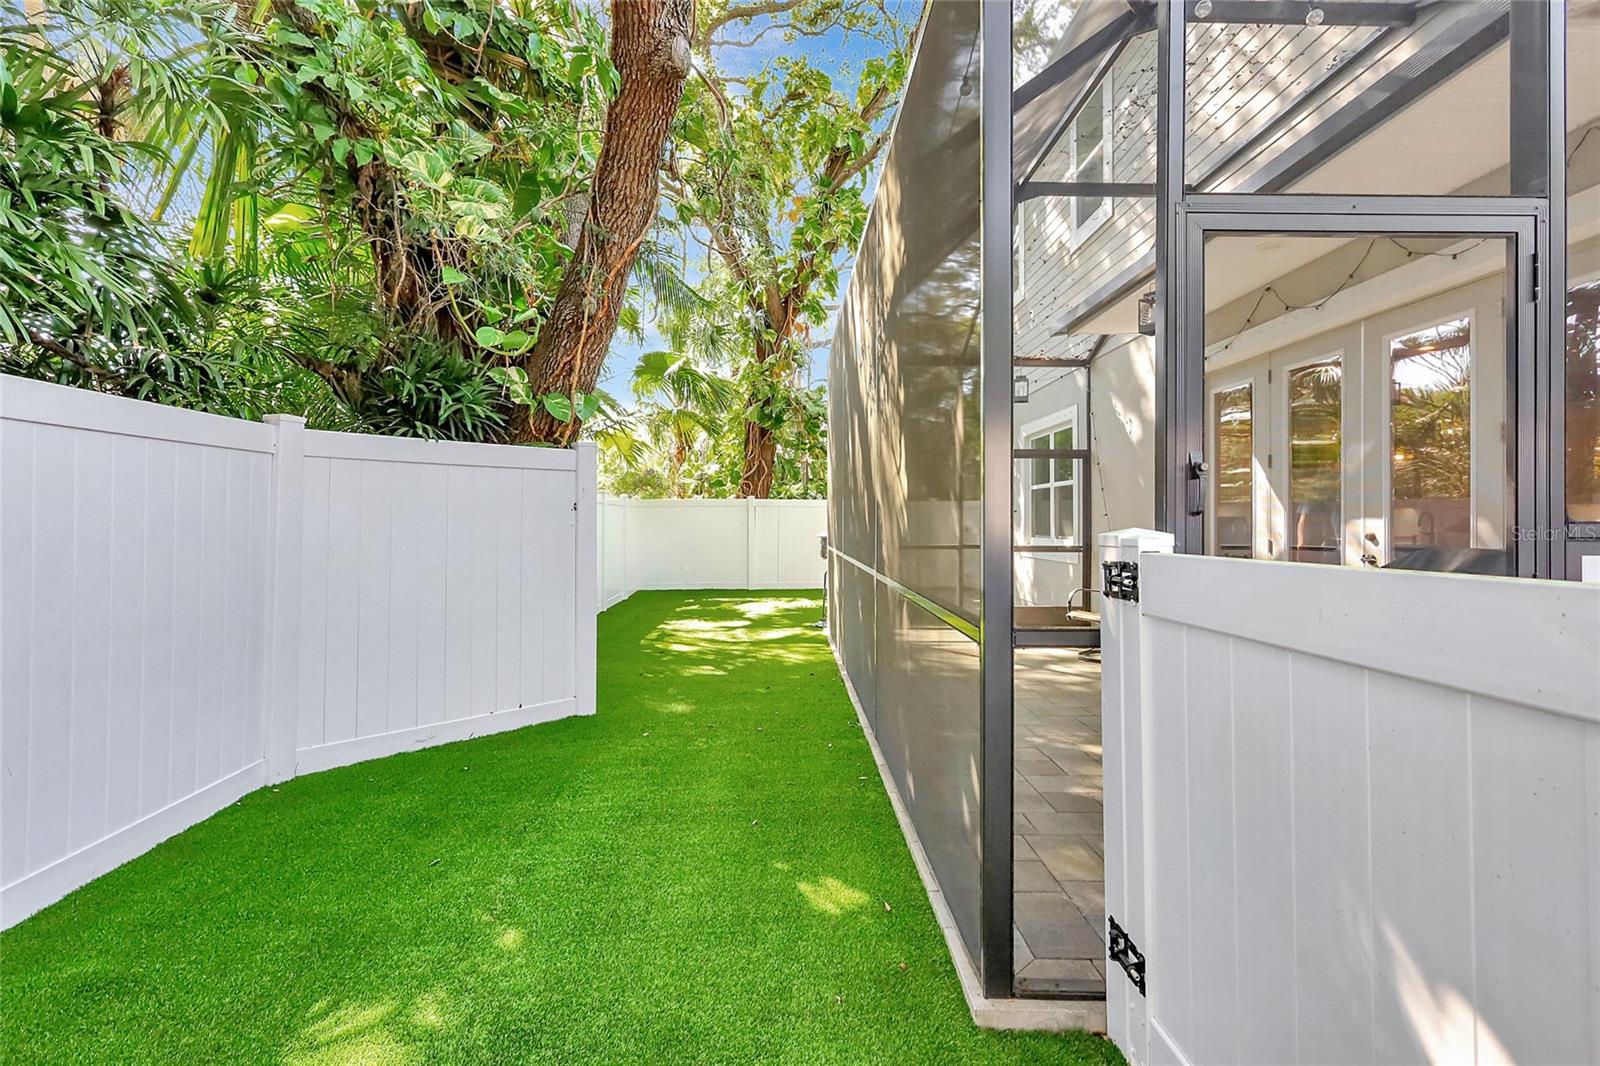 Wall of Greenery over the PVC Fence affords serene privacy